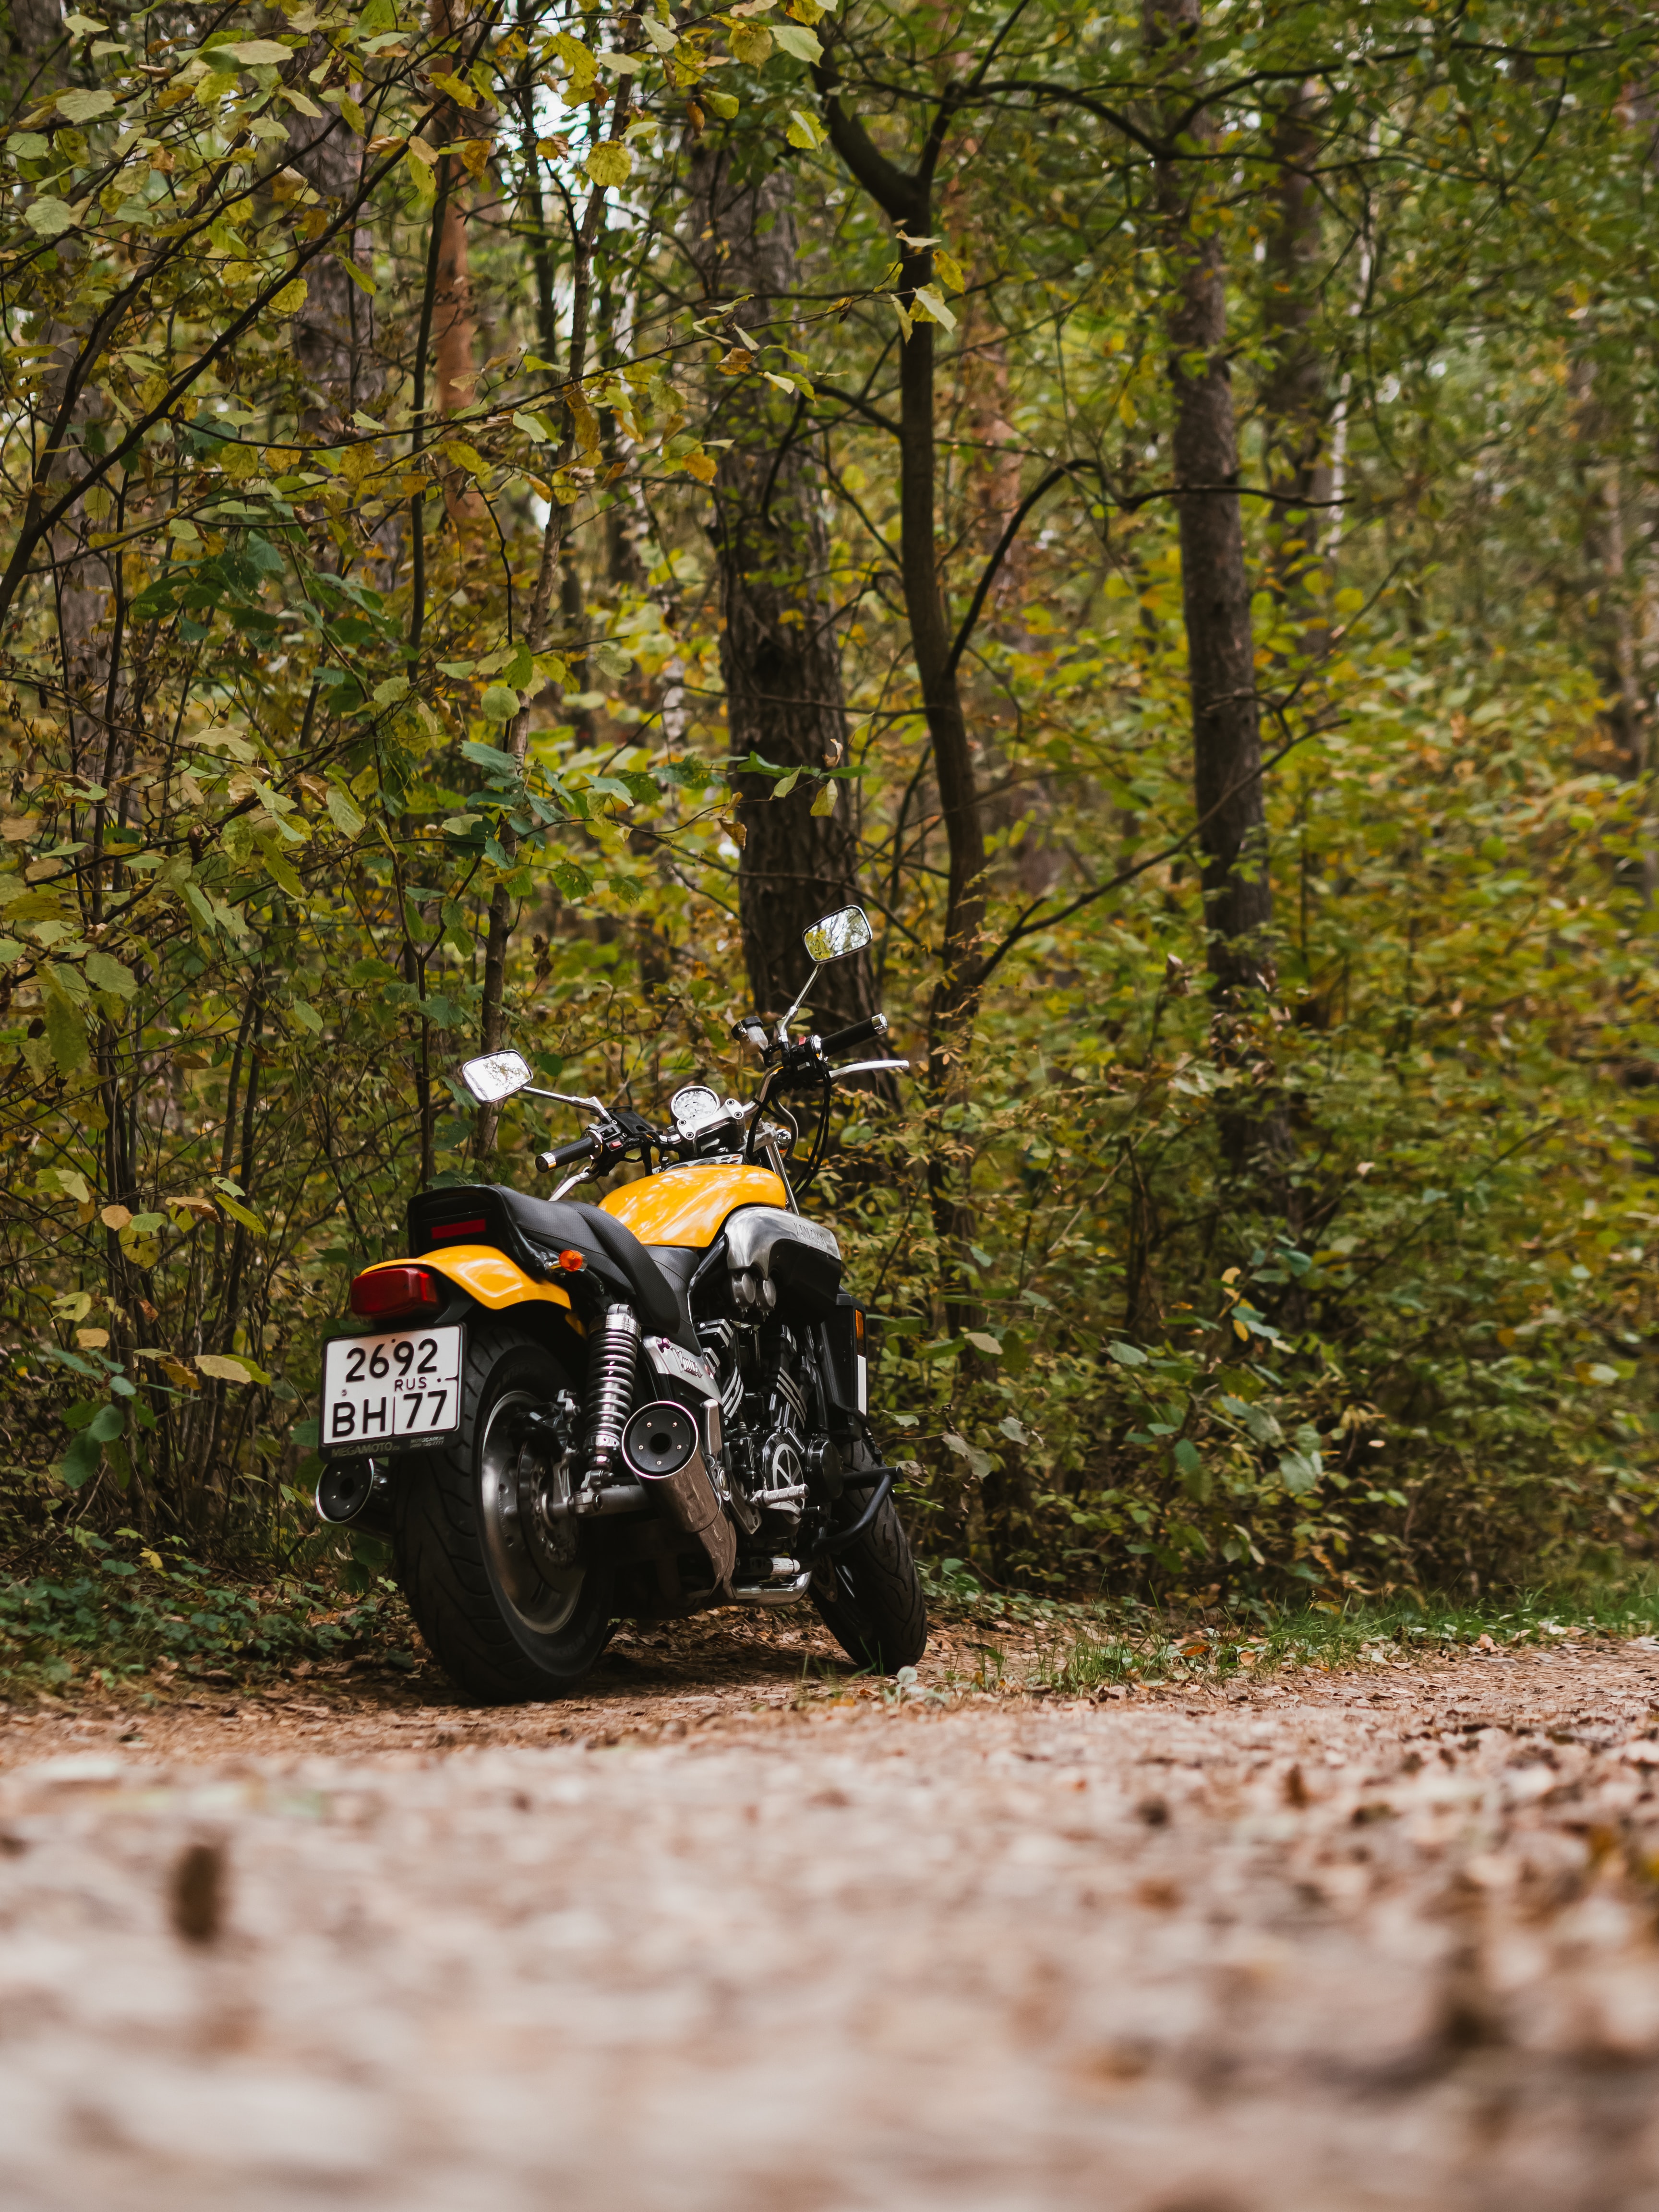 rear view, motorcycles, yamaha, forest, back view, motorcycle, bike, motor